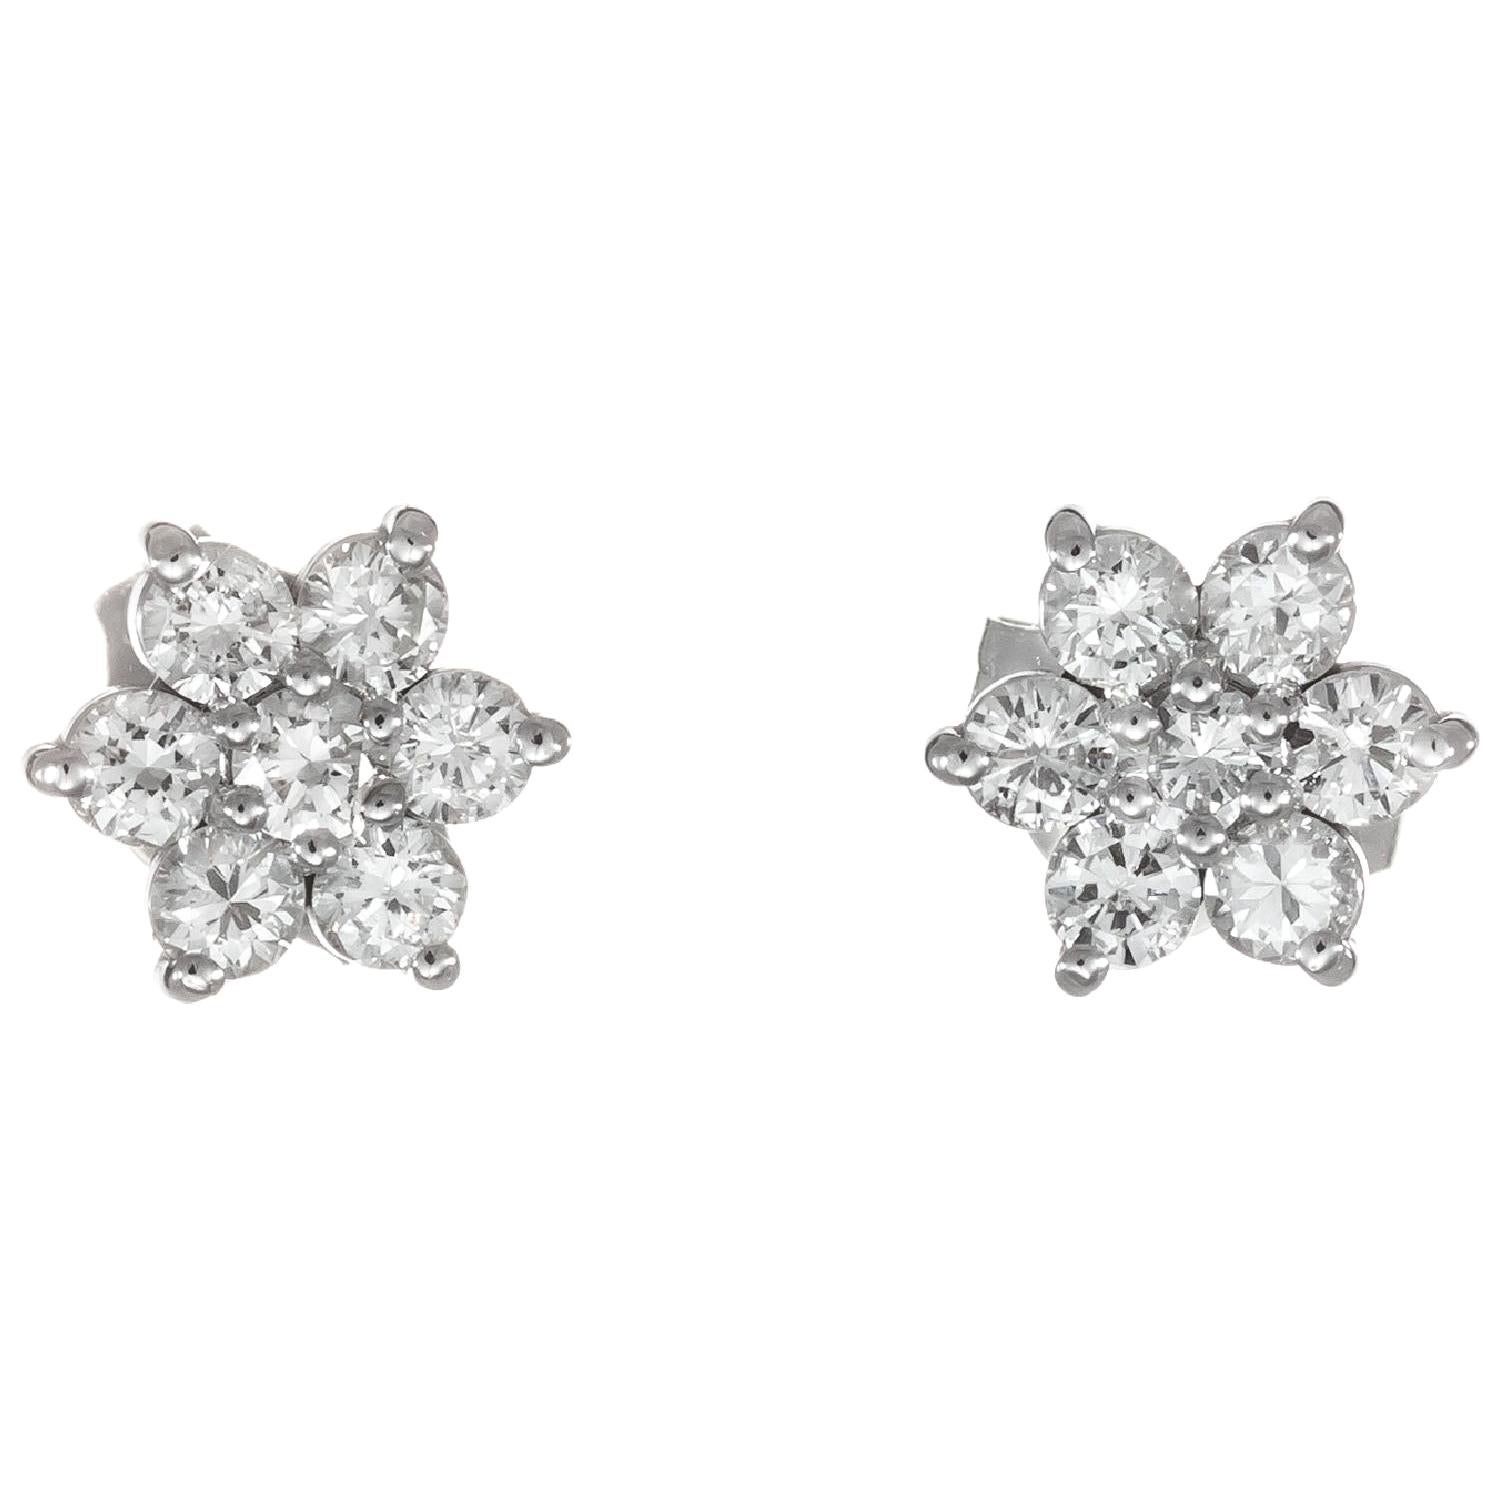 Peter Suchy .46 Carat Diamond White Gold Cluster Earrings